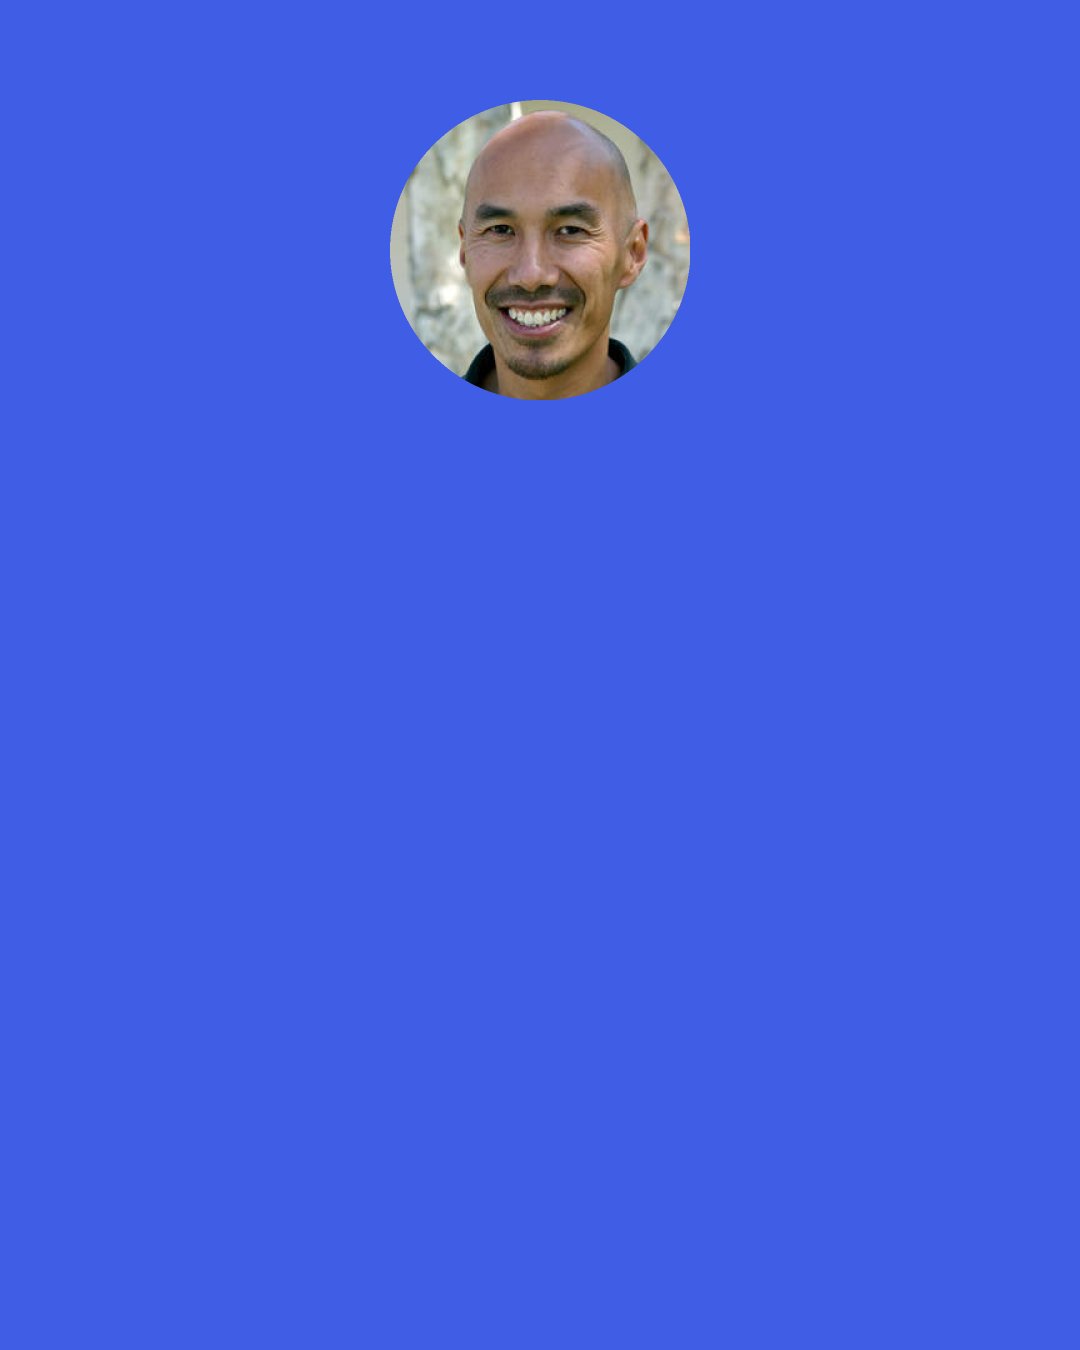 Francis Chan: But hey, if that’s too much to ask, tell them to just become Christians—you know, the people who get to go to heaven without having to commit to anything